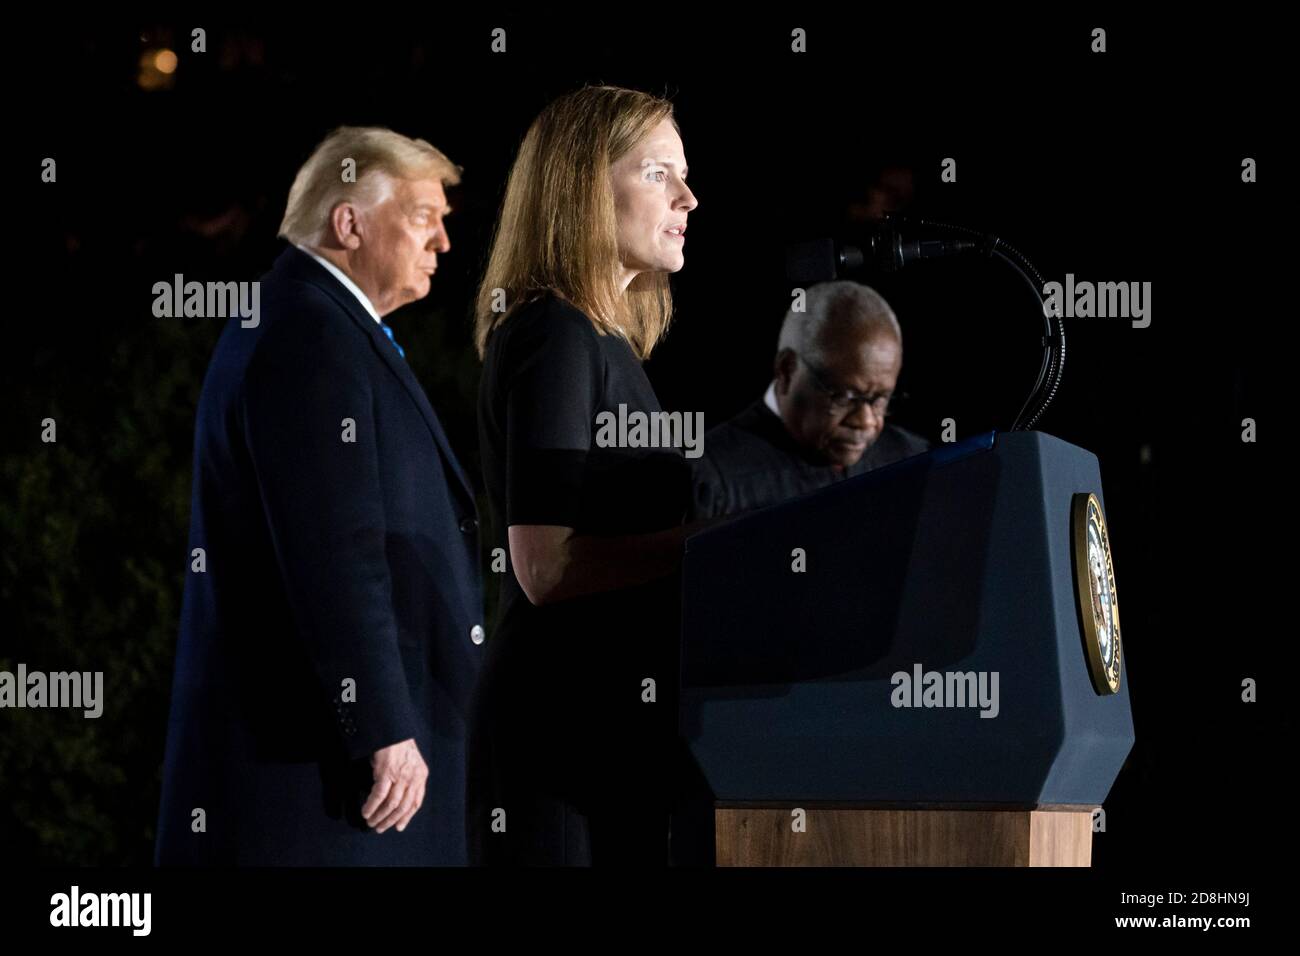 Supreme Court Associate Justice Amy Coney Barrett delivers remarks during her swearing in ceremony on the South Lawn of the White House October 26, 2020 in Washington, DC. Joining Barrett onstage are President Donald Trump and Supreme Court Associate Justice Clarence Thomas. Stock Photo